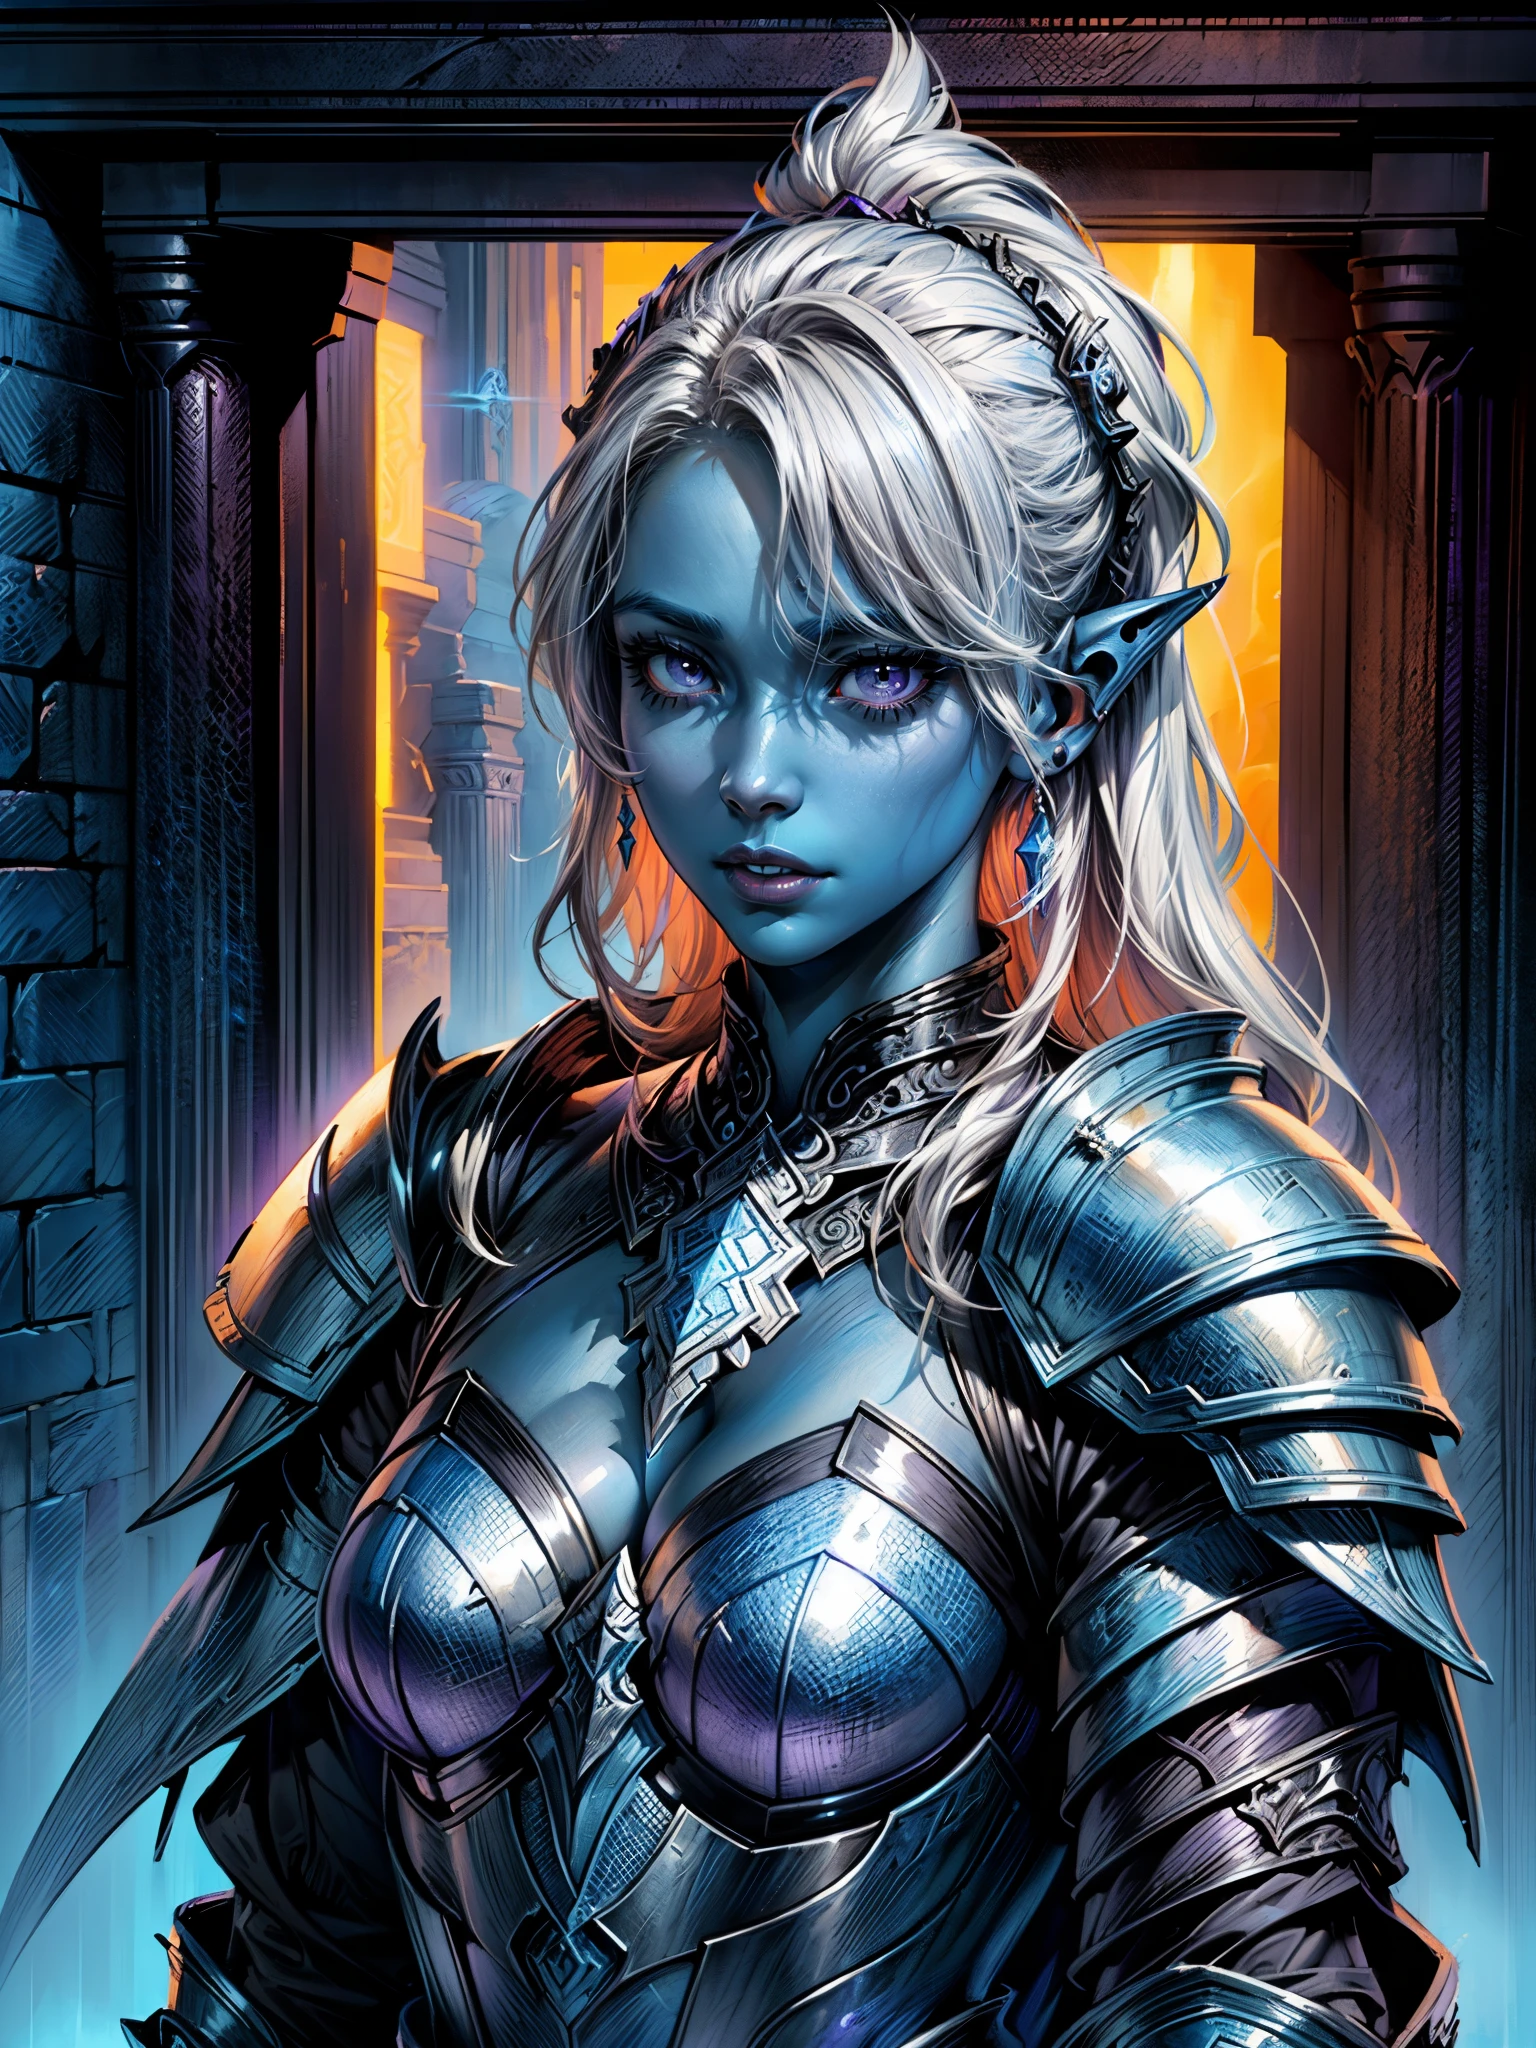 fantasy art, dnd art, RPG art, wide shot, (masterpiece: 1.4) a (portrait: 1.3) intense details, highly detailed, photorealistic, best quality, highres, portrait a female (fantasy art, Masterpiece, best quality: 1.3) ((blue skin: 1.5)), intense details facial details, exquisite beauty, (fantasy art, Masterpiece, best quality) cleric, (blue: 1.3) skinned female, (white hair: 1.4), long hair, (hair hides ears: 1.5), (purple eyes: 1.3), action shot fantasy art, Masterpiece, best quality) armed a fiery sword red fire, wearing heavy (white: 1.3) half plate mail armor, wearing high heeled laced boots, wearing an(orange :1.3) cloak, wearing glowing holy symbol GlowingRunes_yellow, within fantasy temple background, reflection light, high details, best quality, 16k, [ultra detailed], masterpiece, best quality, (extremely detailed), close up, ultra wide shot, photorealistic, RAW, fantasy art, dnd art, fantasy art, realistic art,((best quality)), ((masterpiece)), (detailed), perfect face,